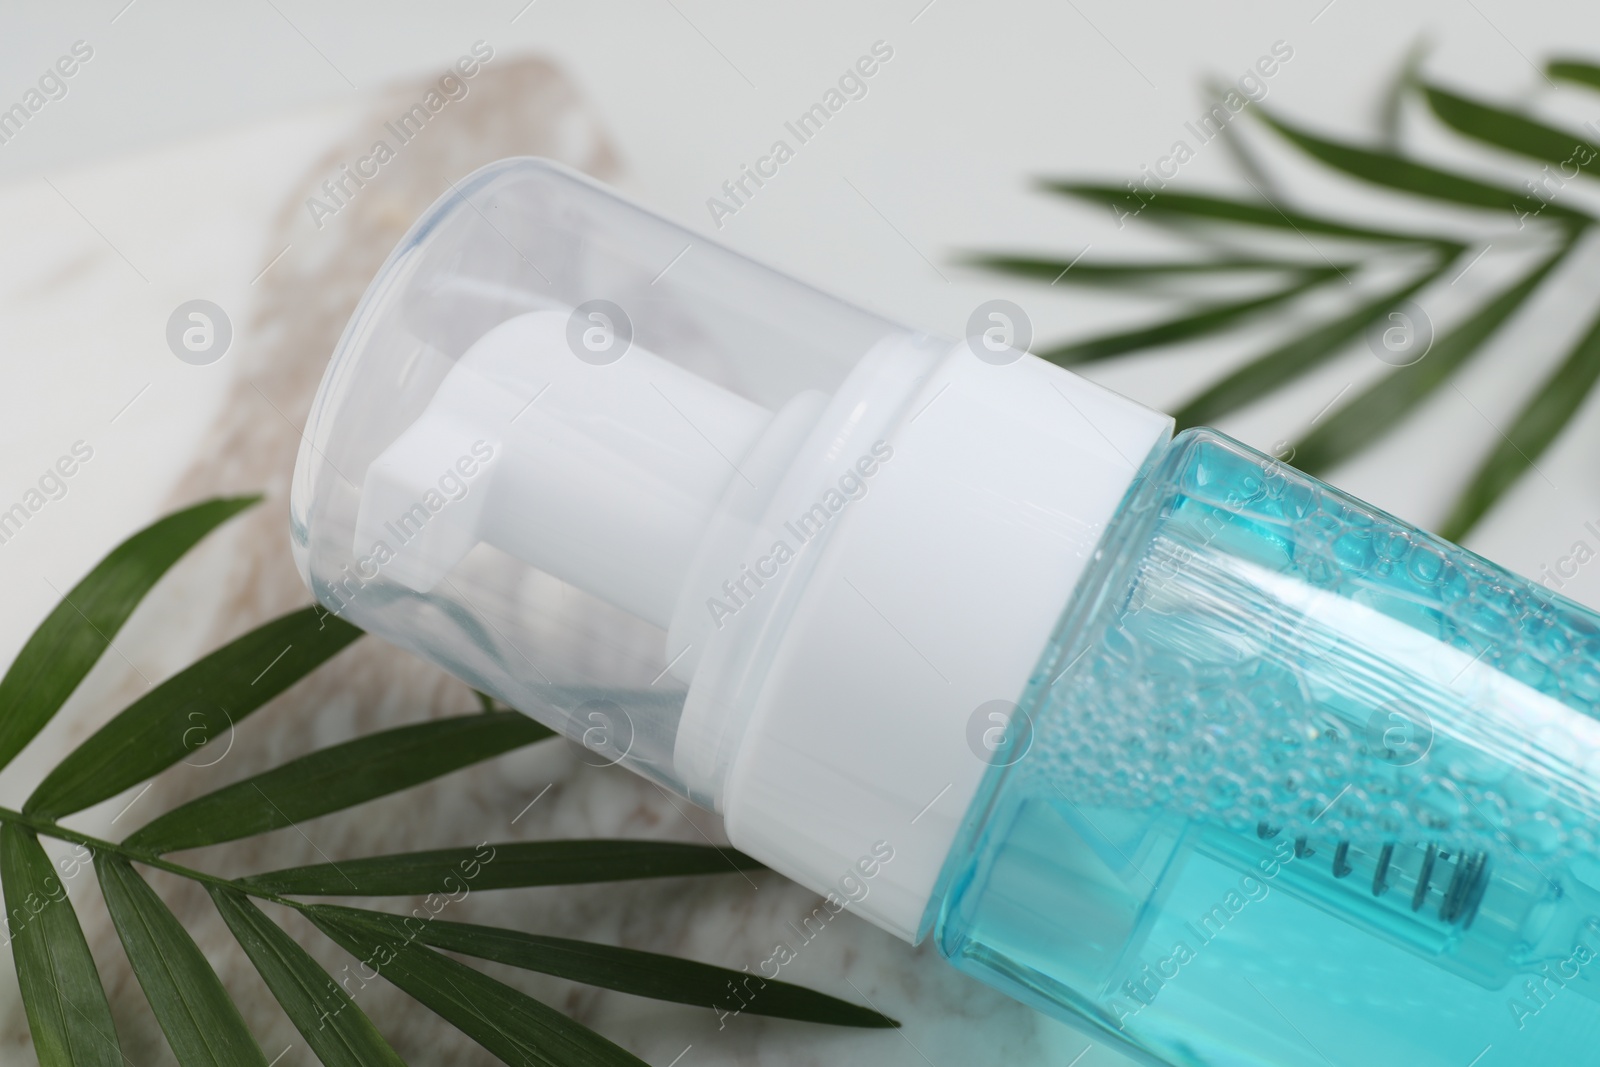 Photo of Bottle of face cleansing product and green leaves on table, closeup